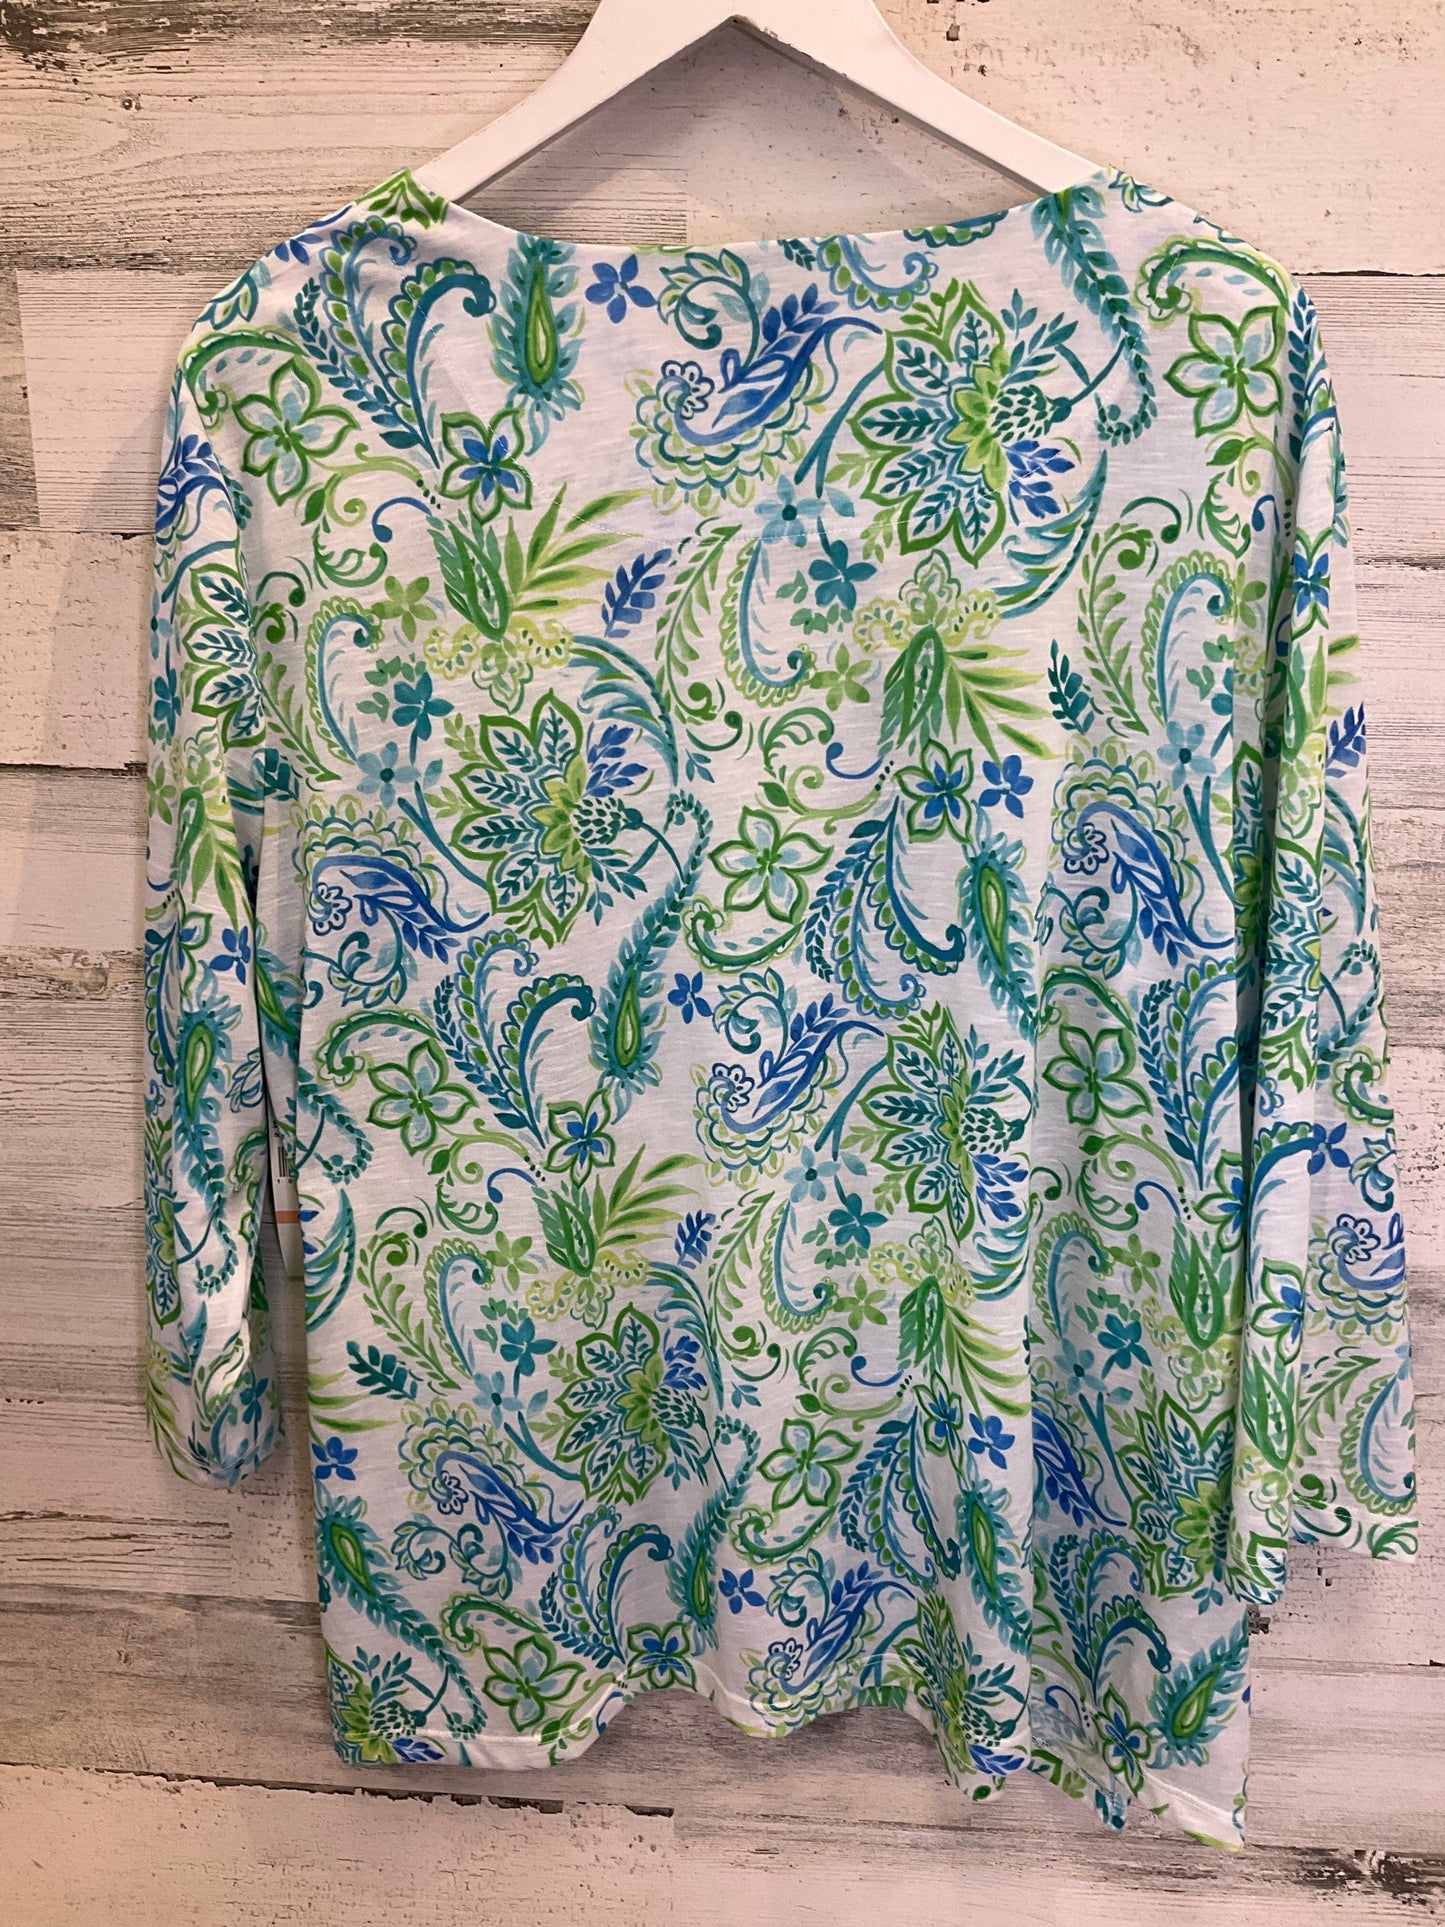 Floral Print Top 3/4 Sleeve Alfred Dunner, Size 2x